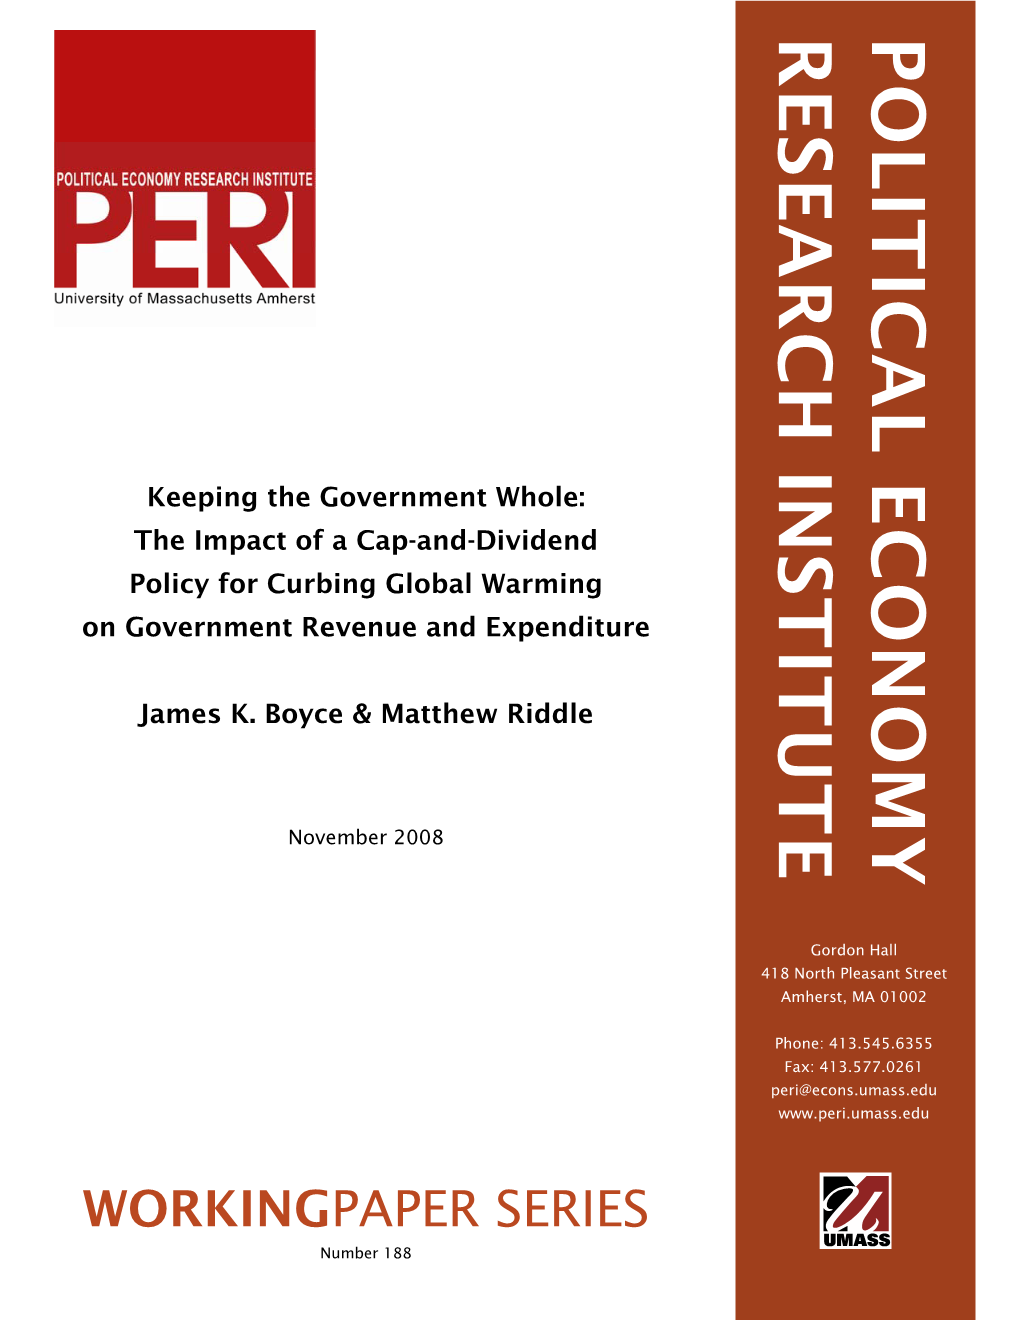 Keeping the Government Whole: the Impact of a Cap-And-Dividend